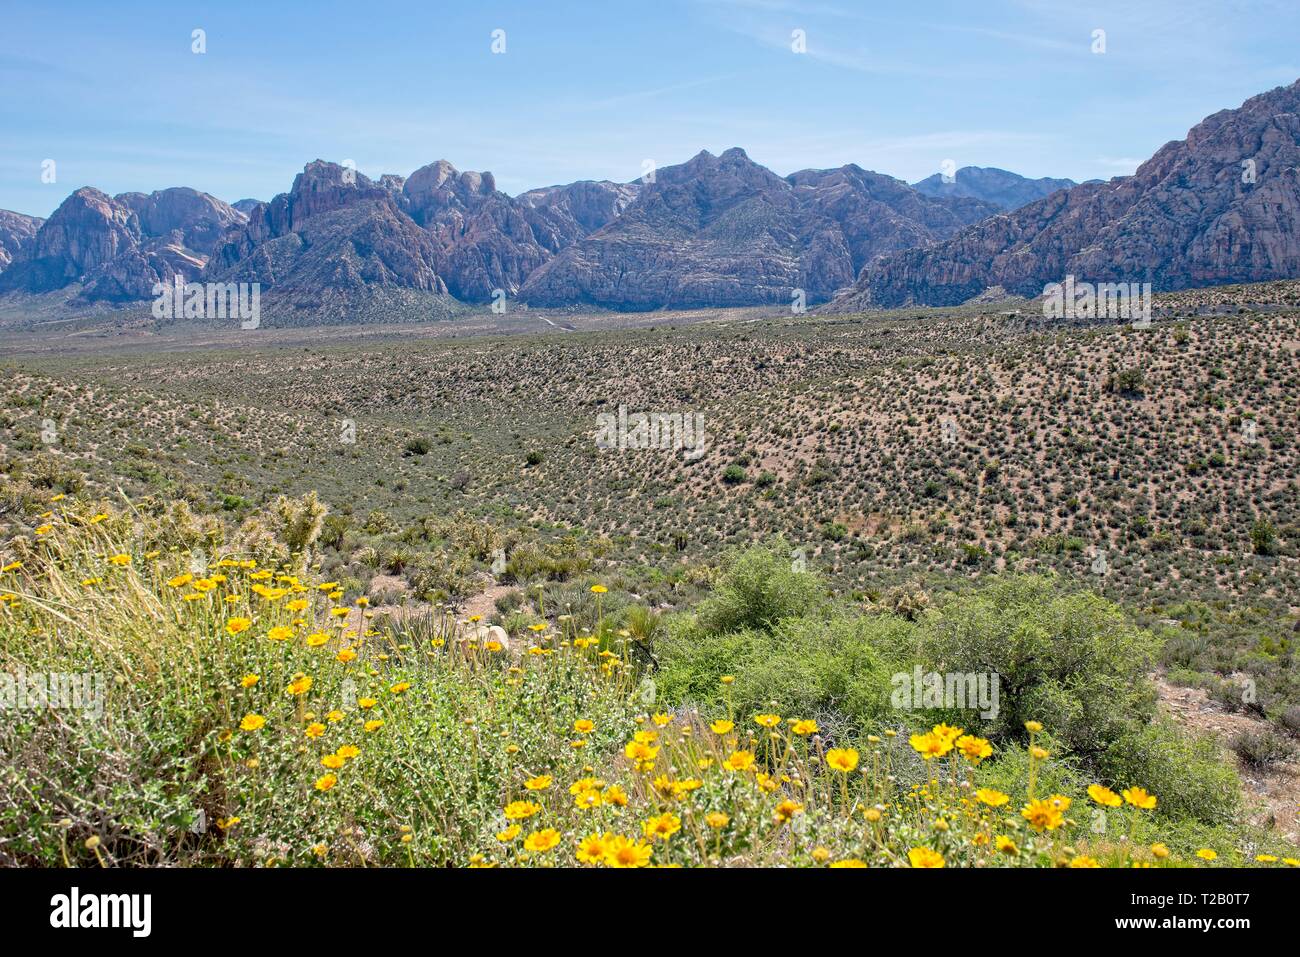 Sprawling Desert with wild flowers and a Mountain View in Red Rock Canyon Nature Conservancy Stock Photo